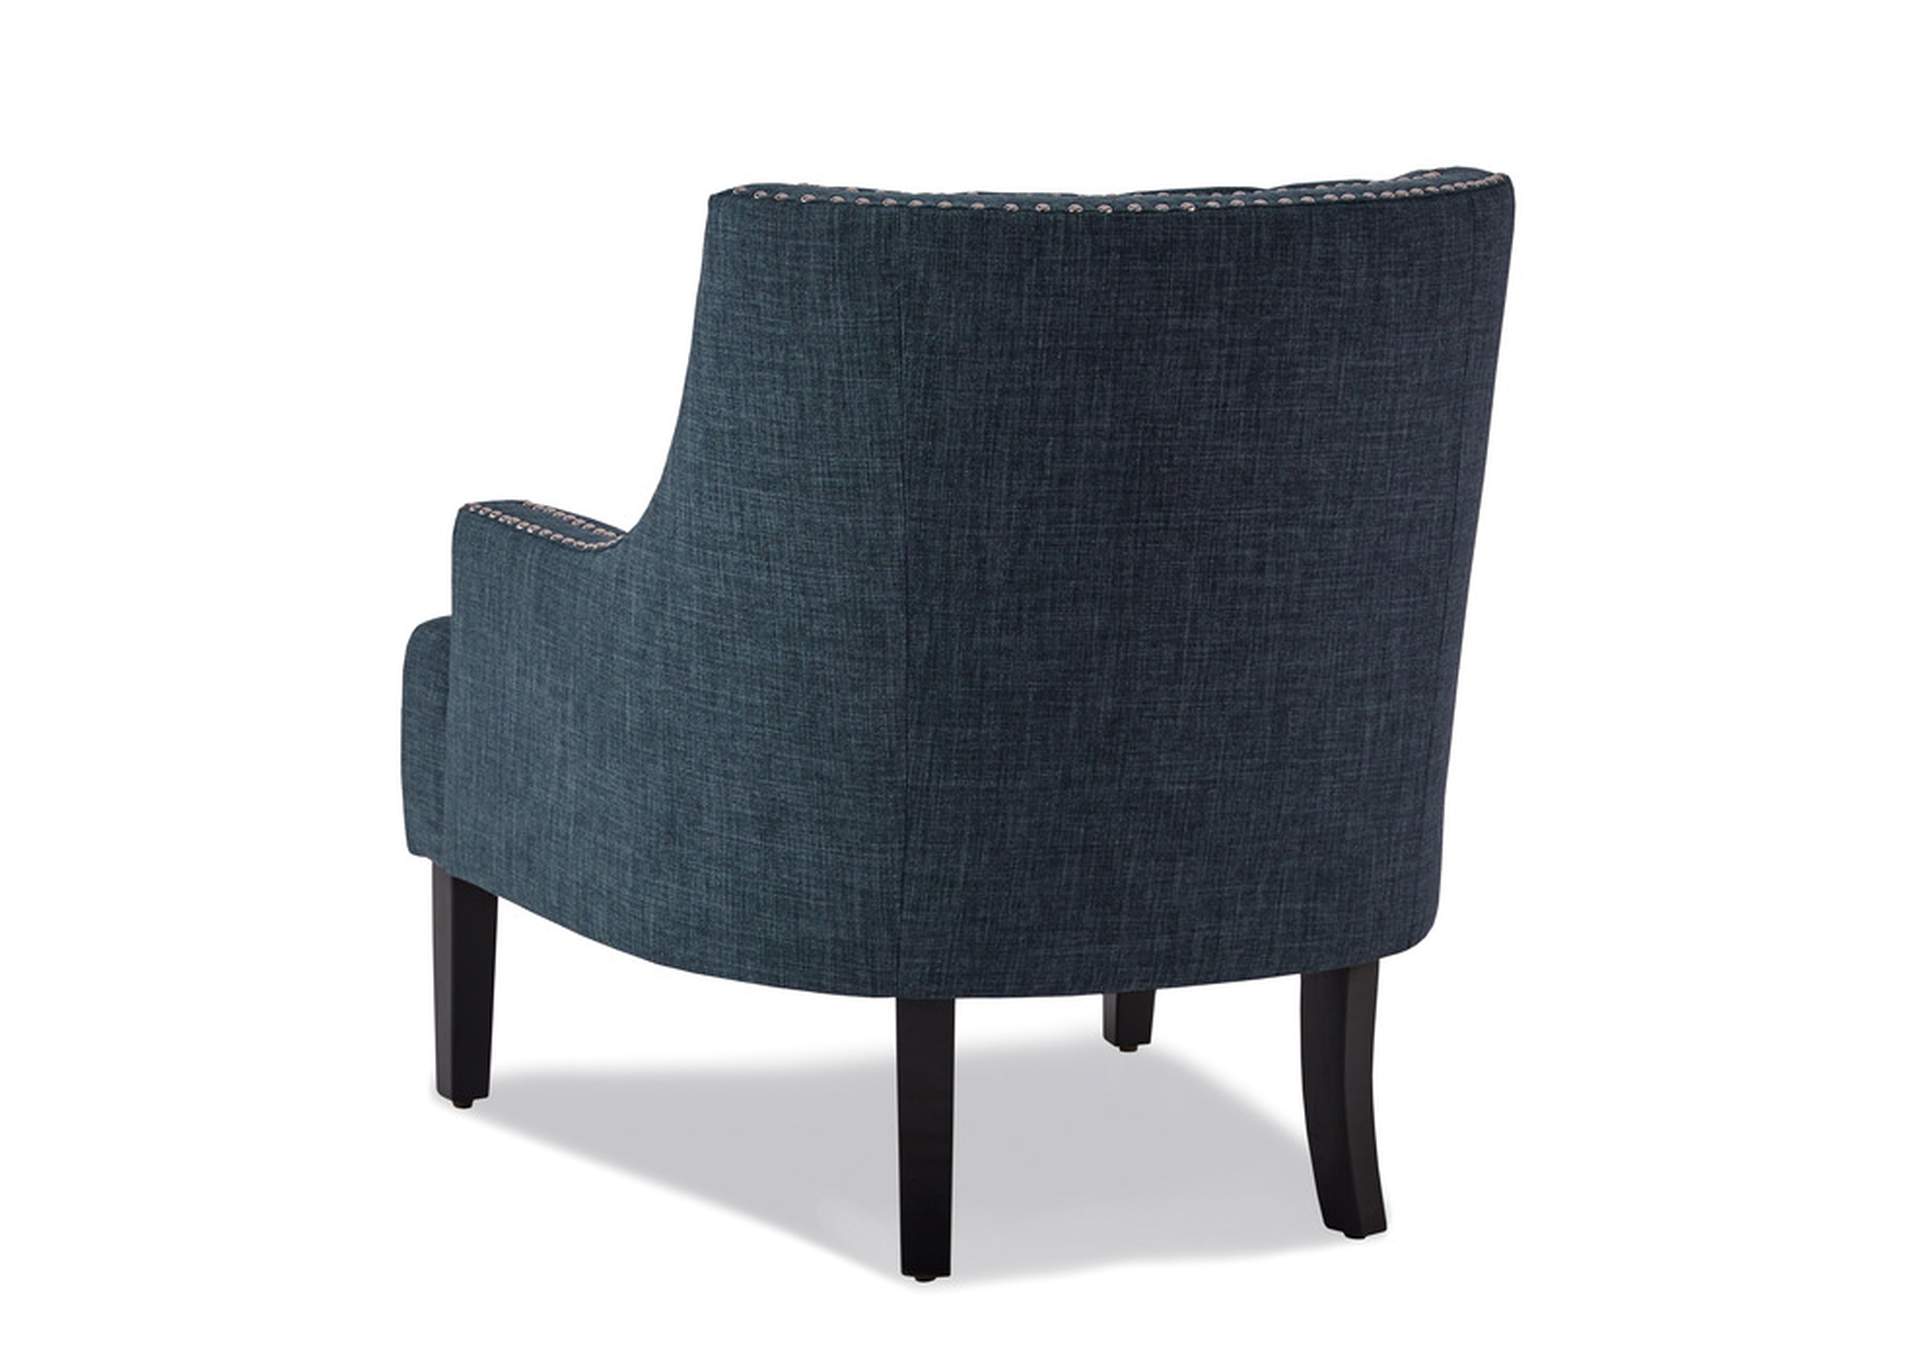 Charisma Accent Chair,Homelegance